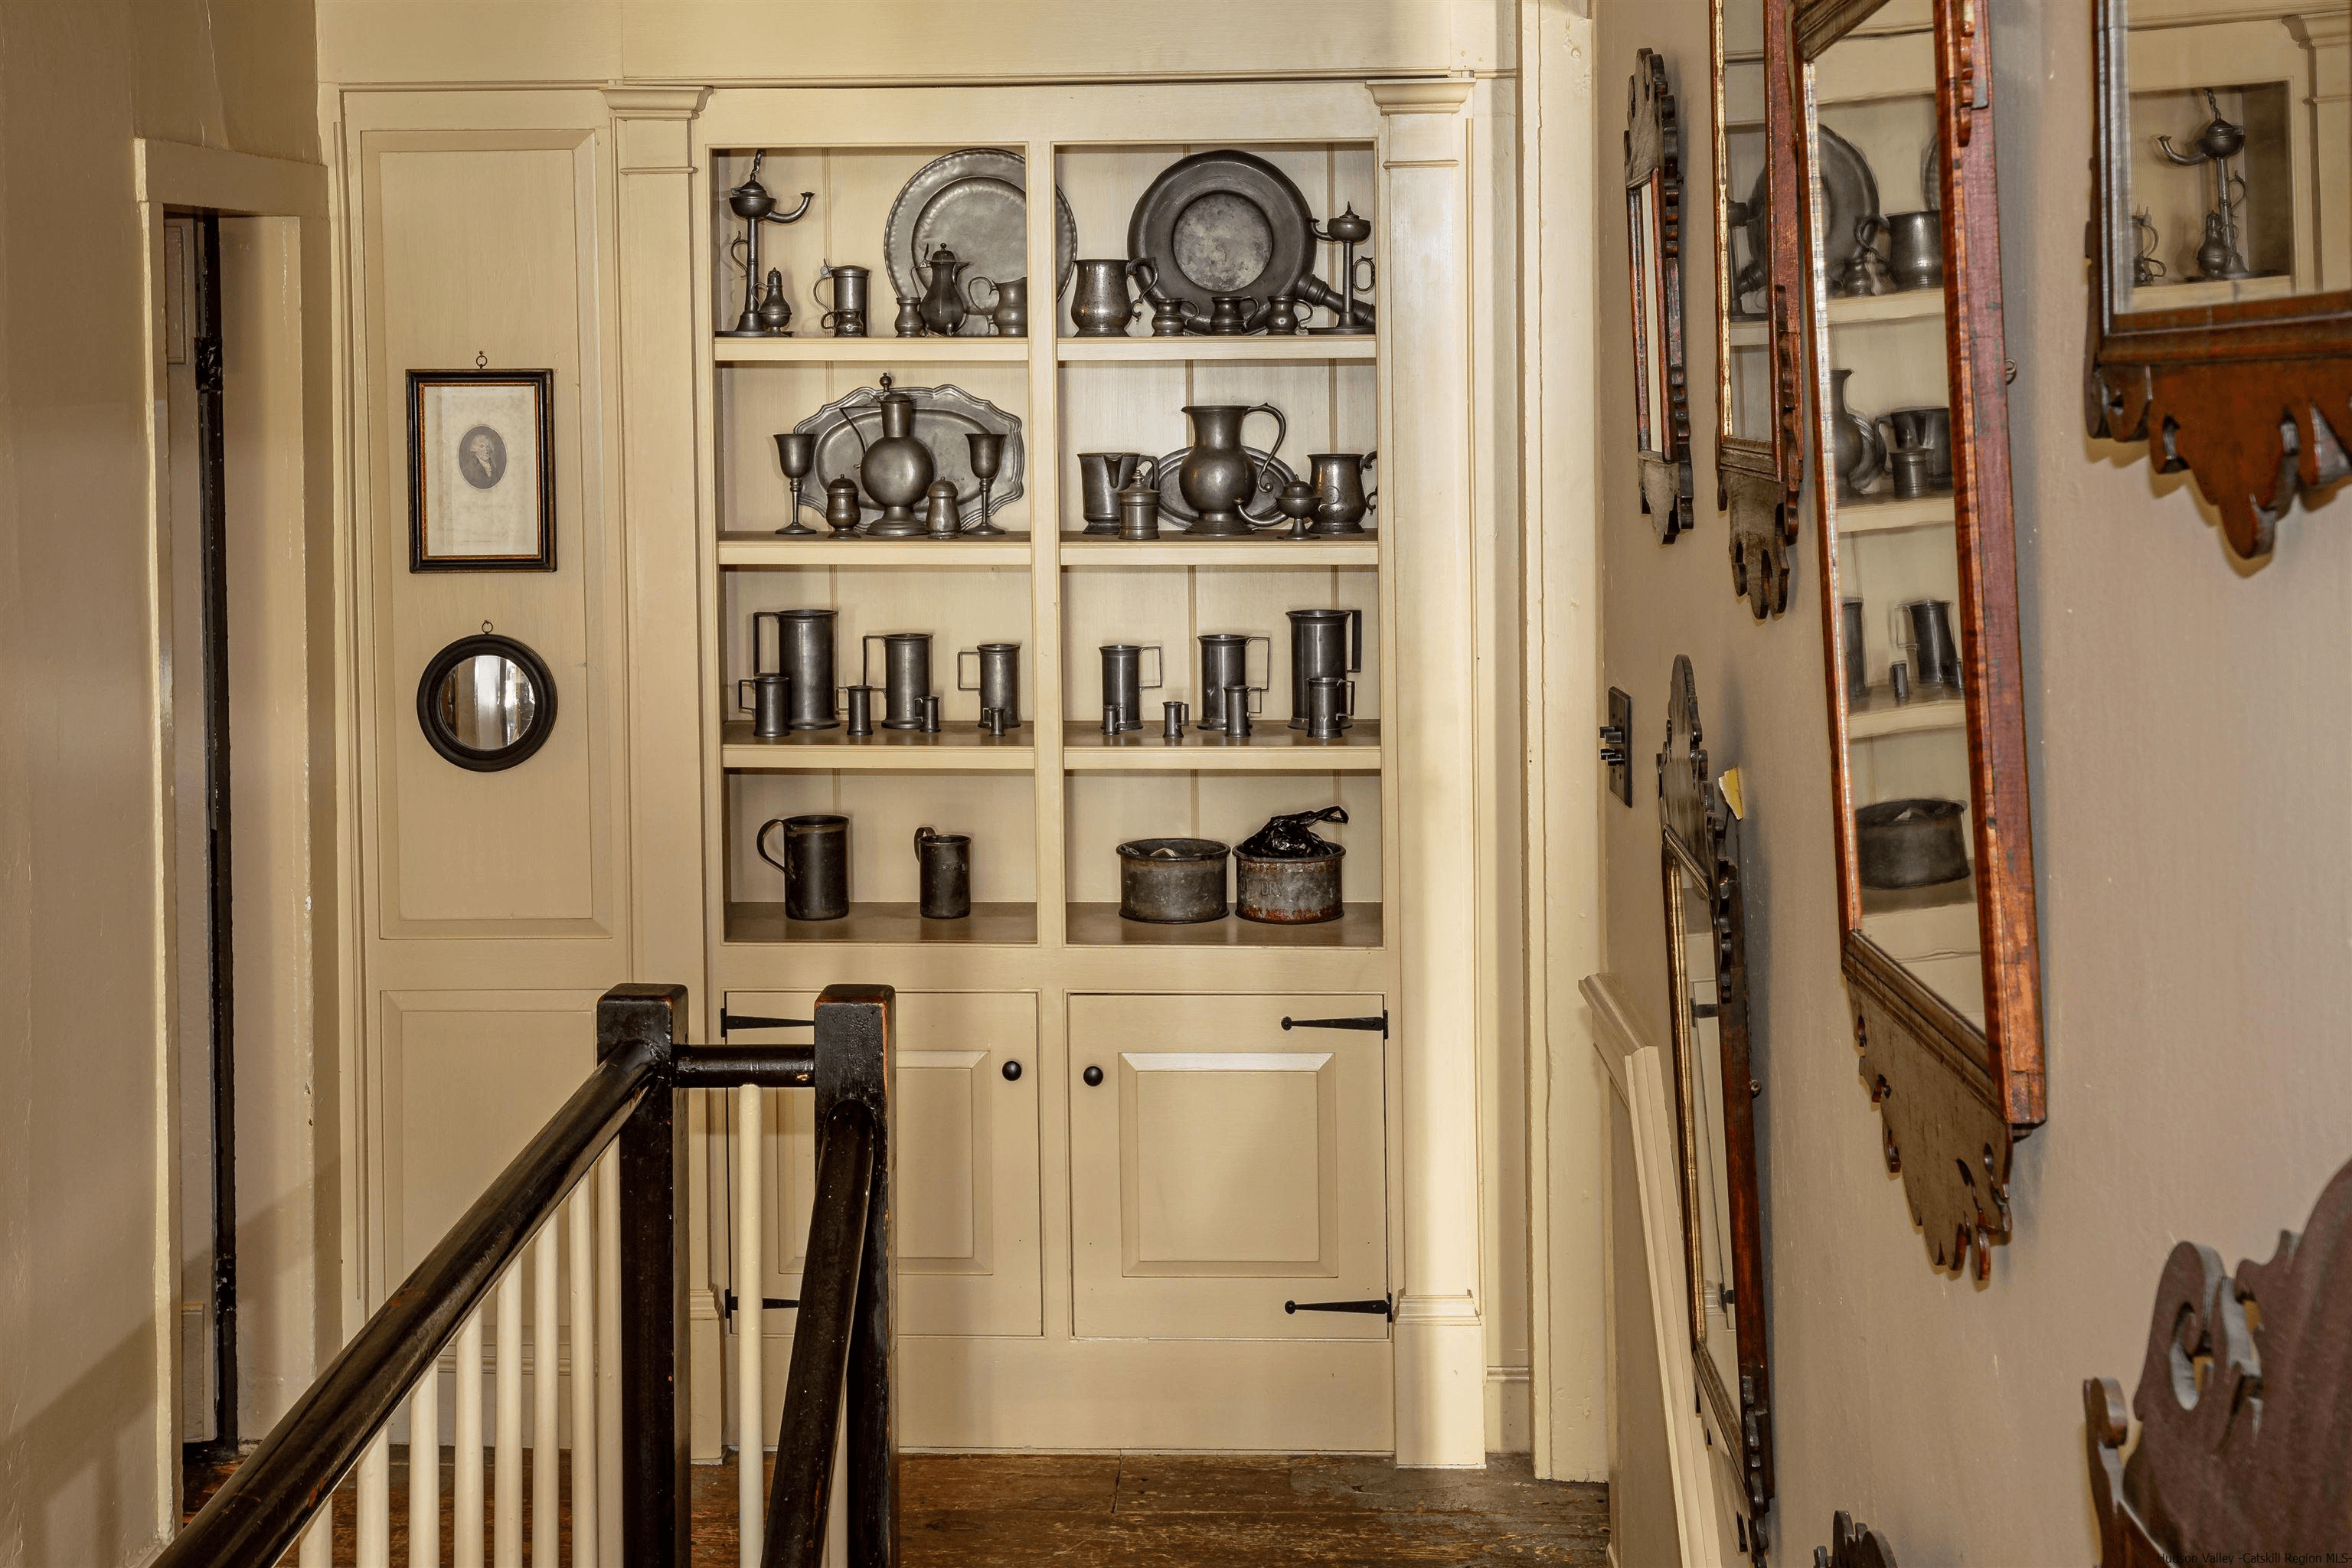 the bookcase on the 2nd floor landing which hides the secret passageway